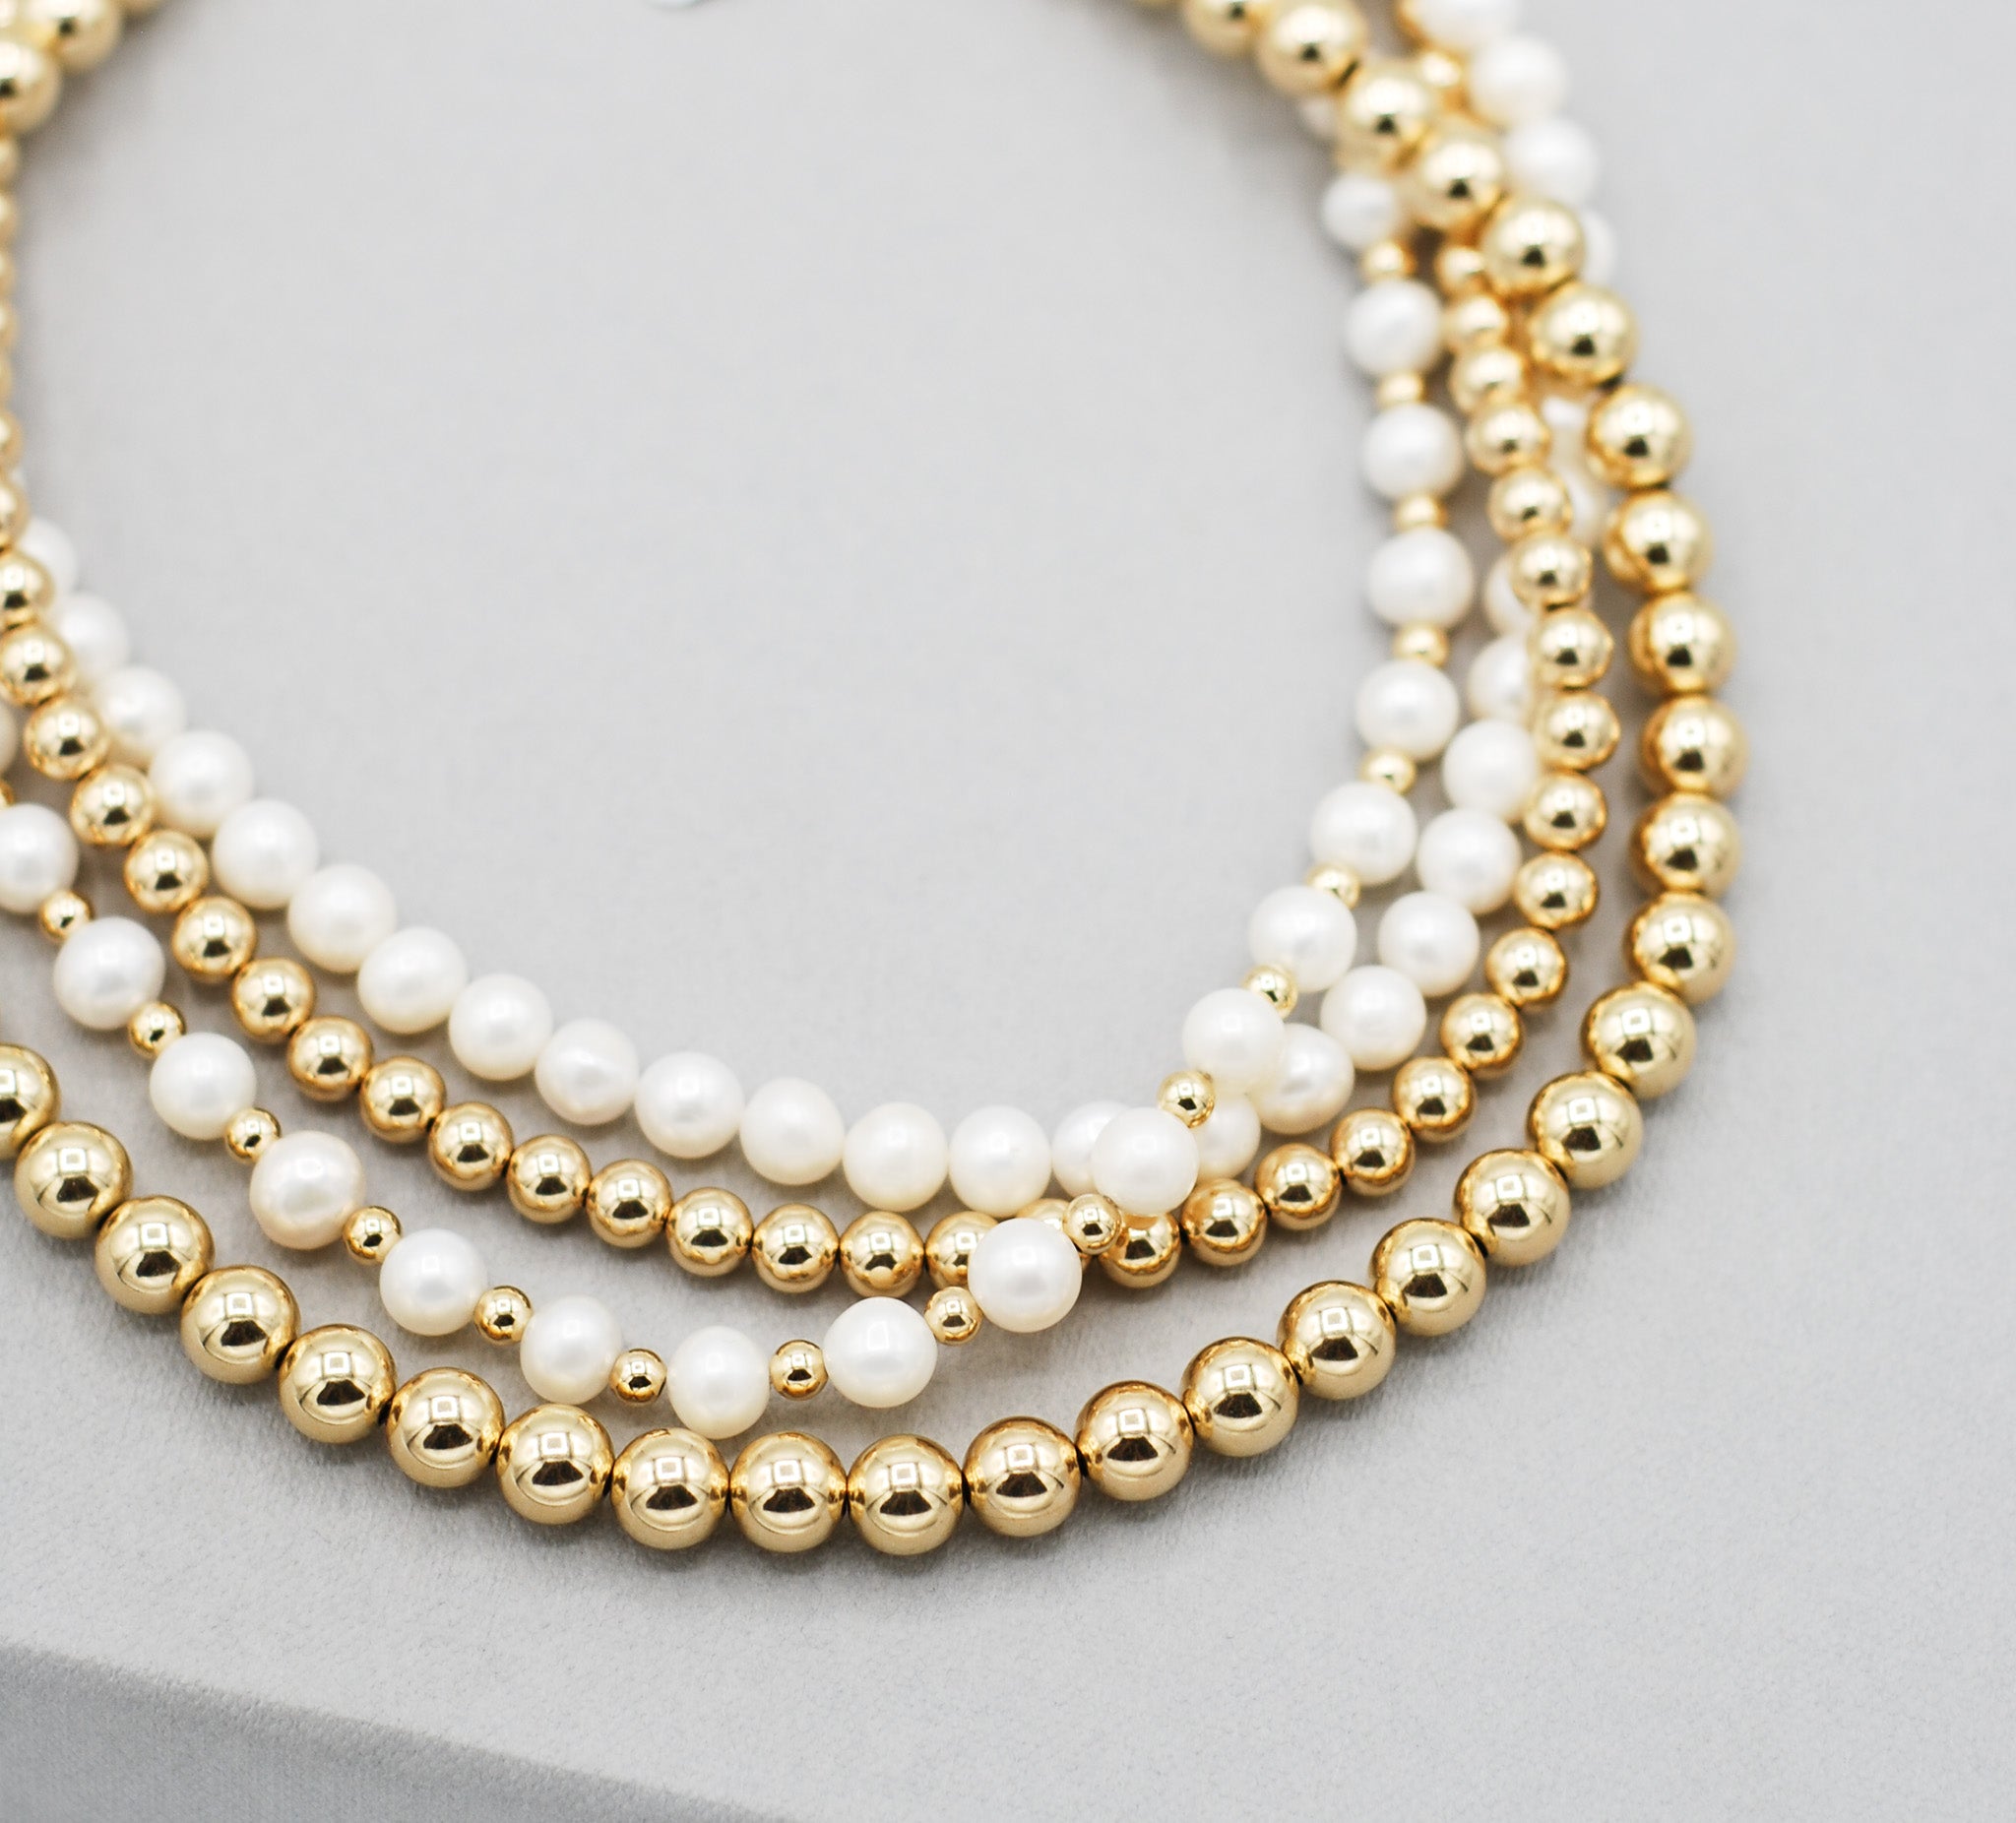 14k Gold Filled 6mm Beaded Lux Necklace